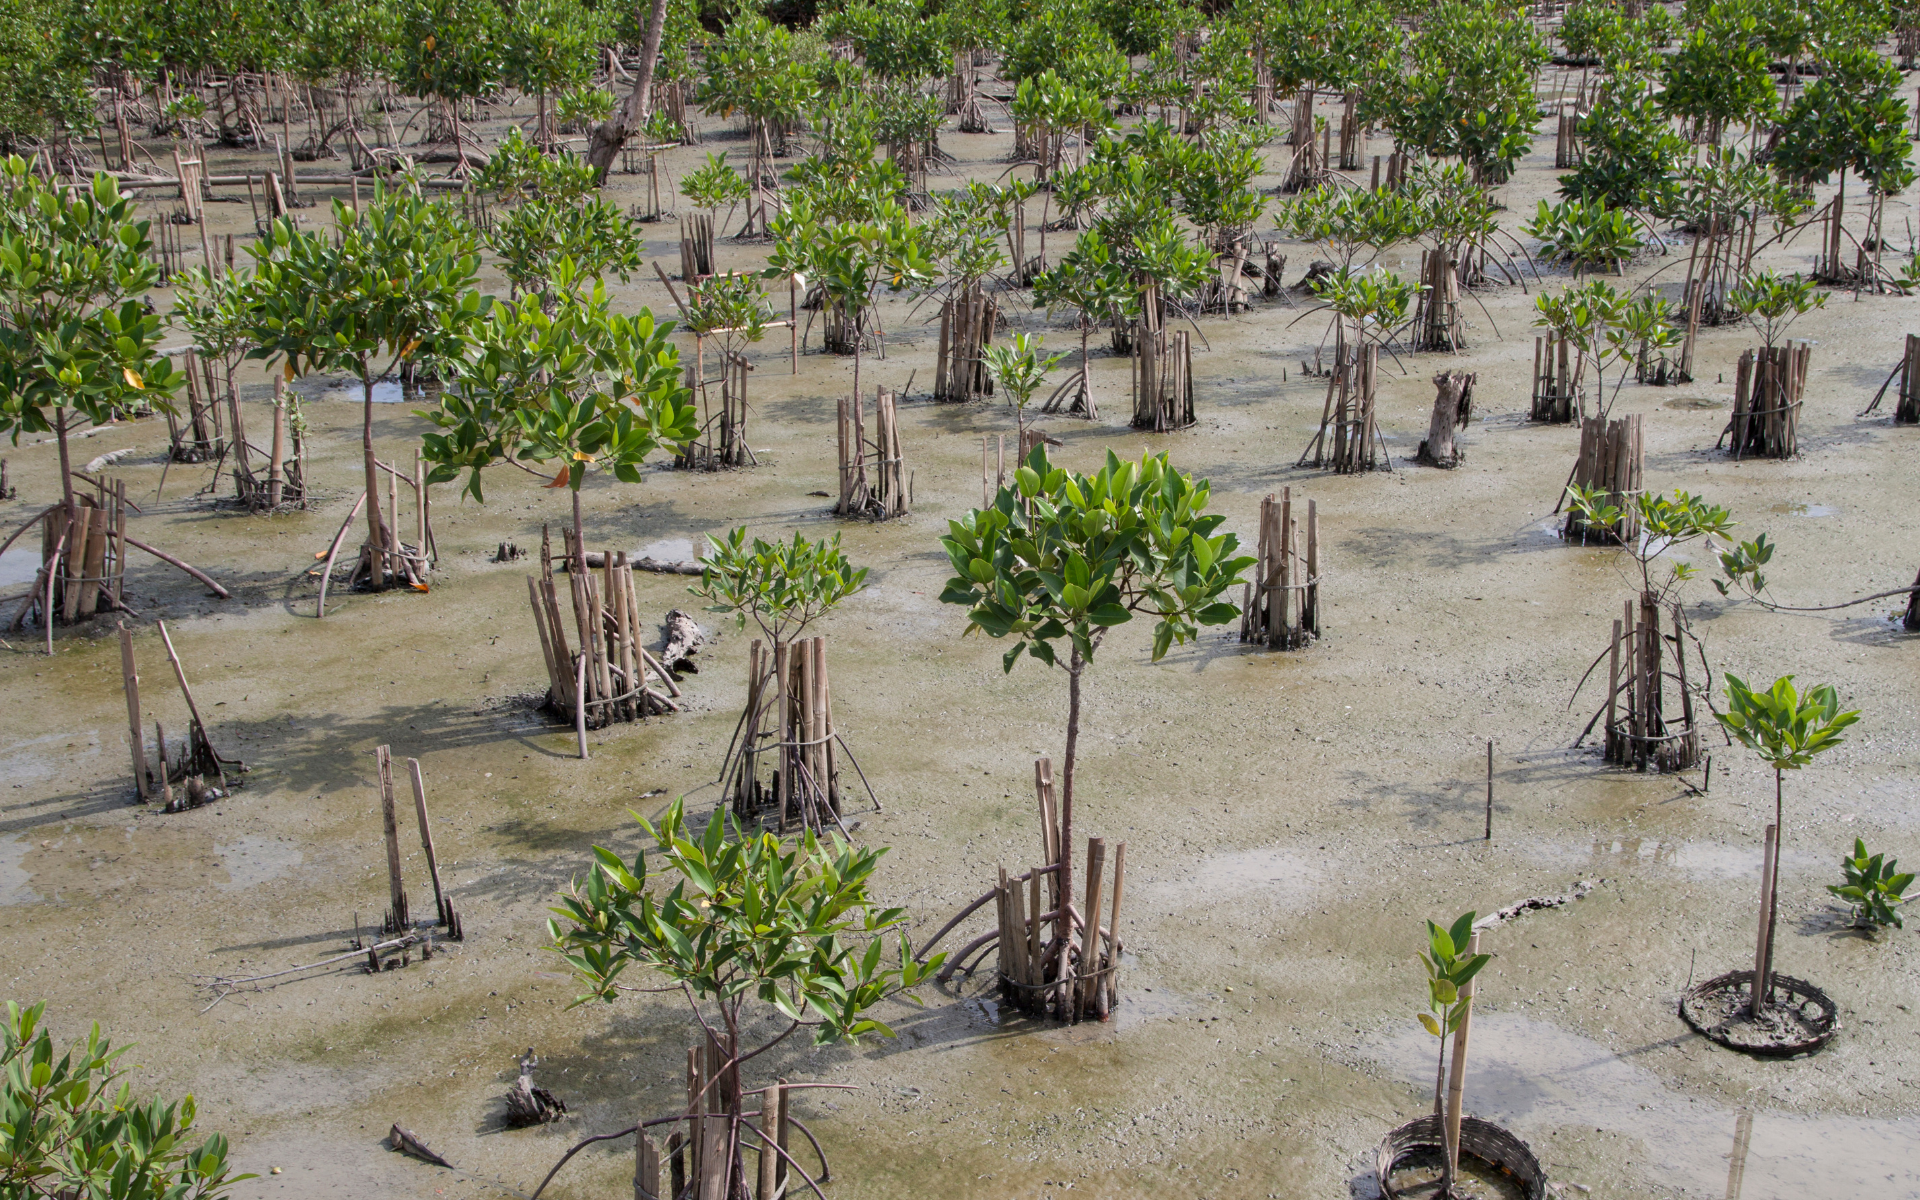 Arial view of mangrove plants